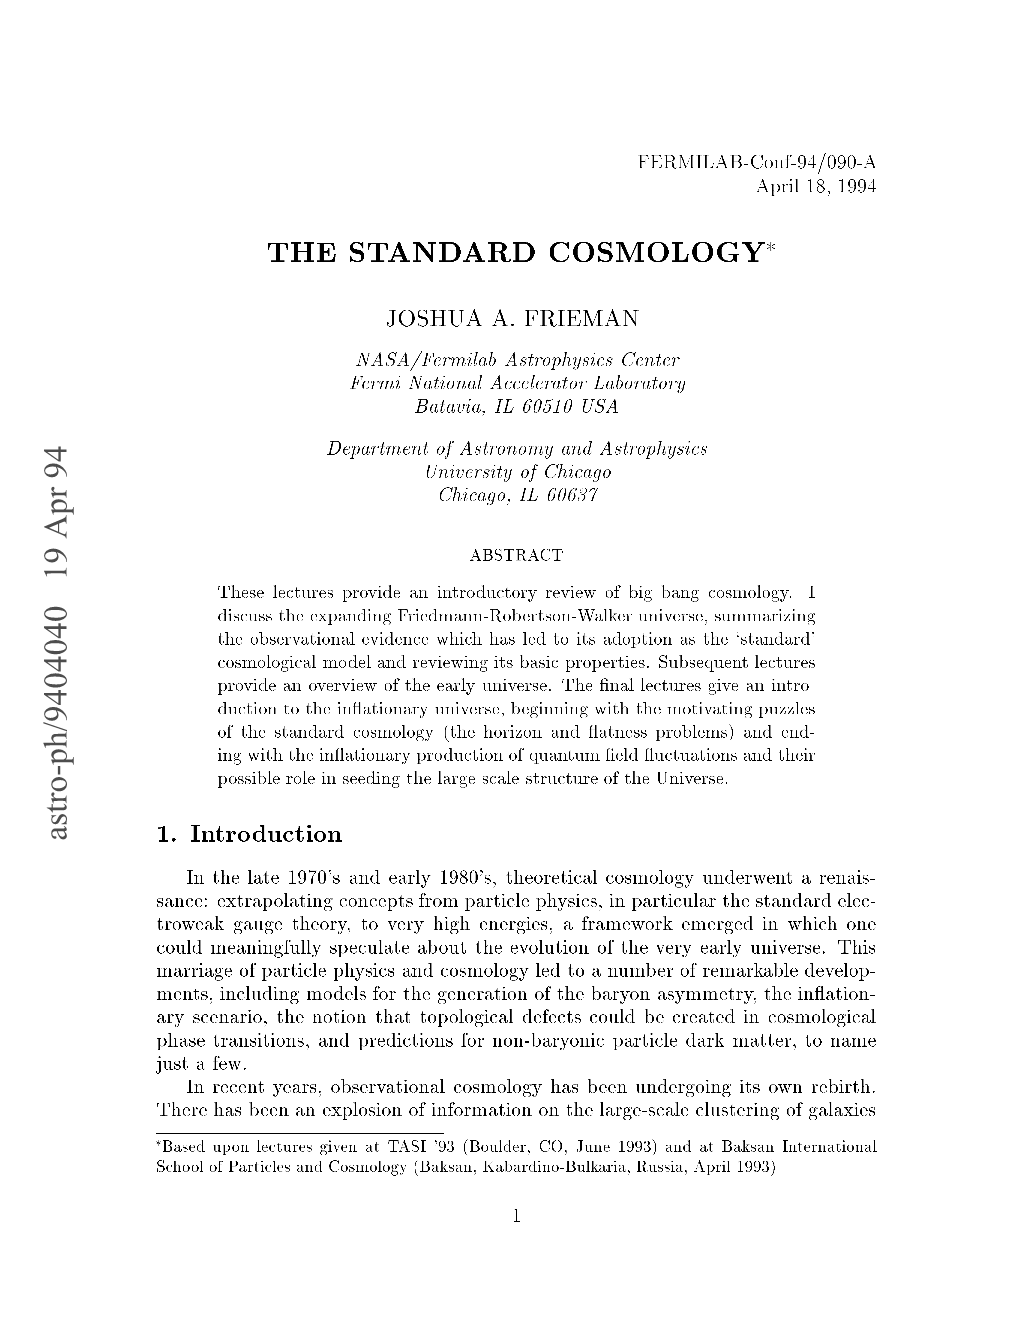 The Standard Cosmology� the Hot Big Bang Mo Del� Fo Cusing on Its Kinematics And